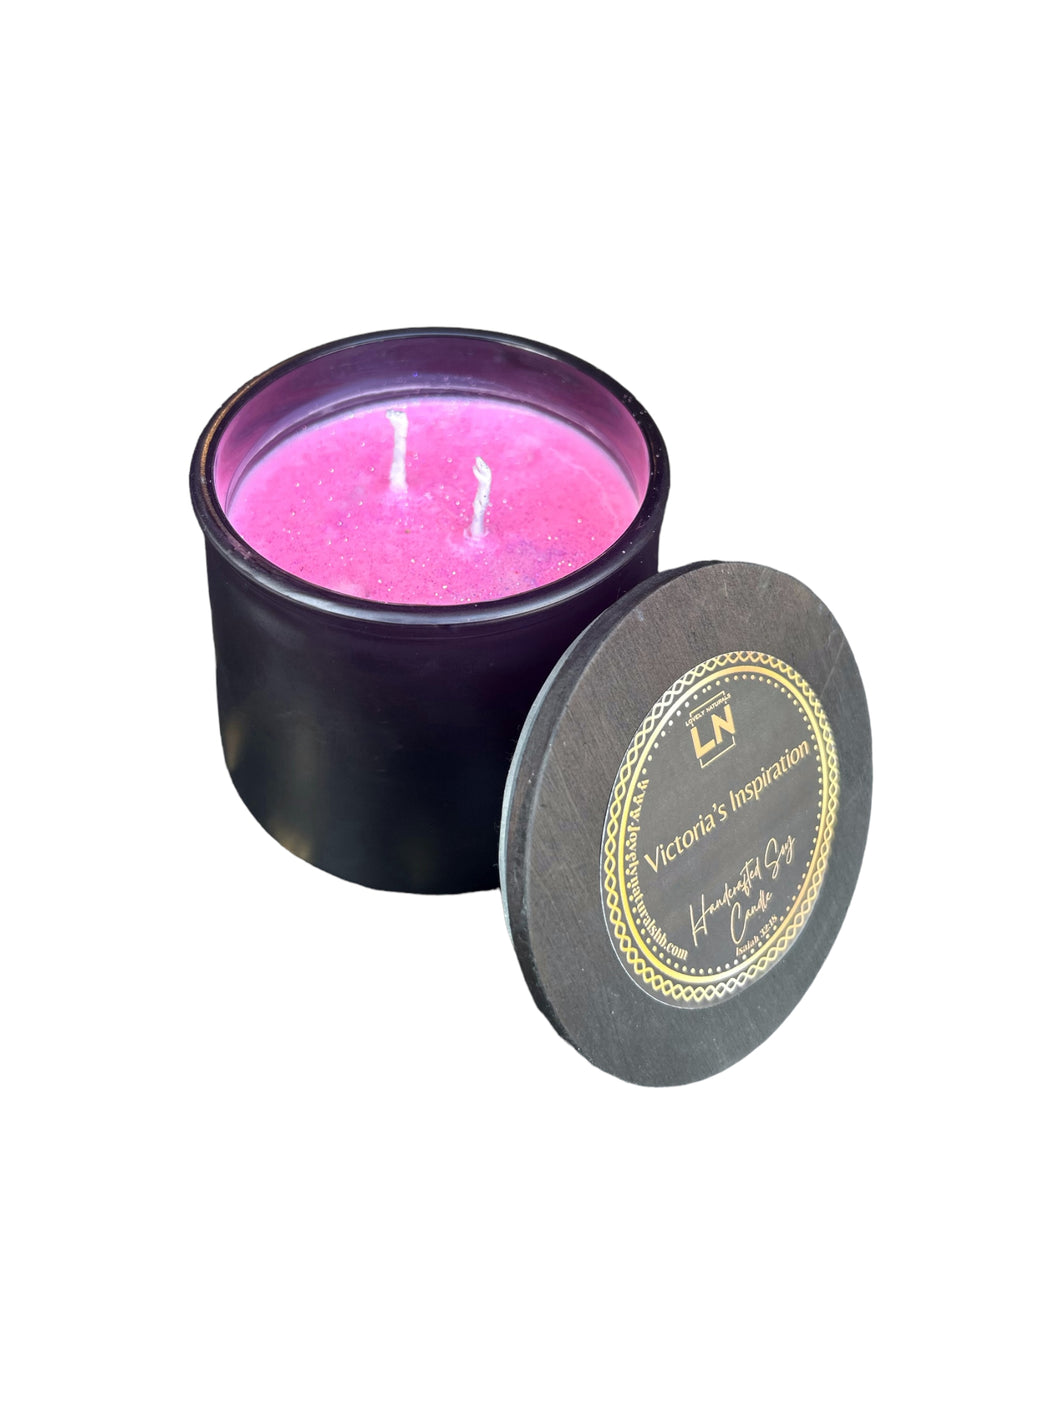 18 oz. Victoria's Inspiration Soy Lotion Candle